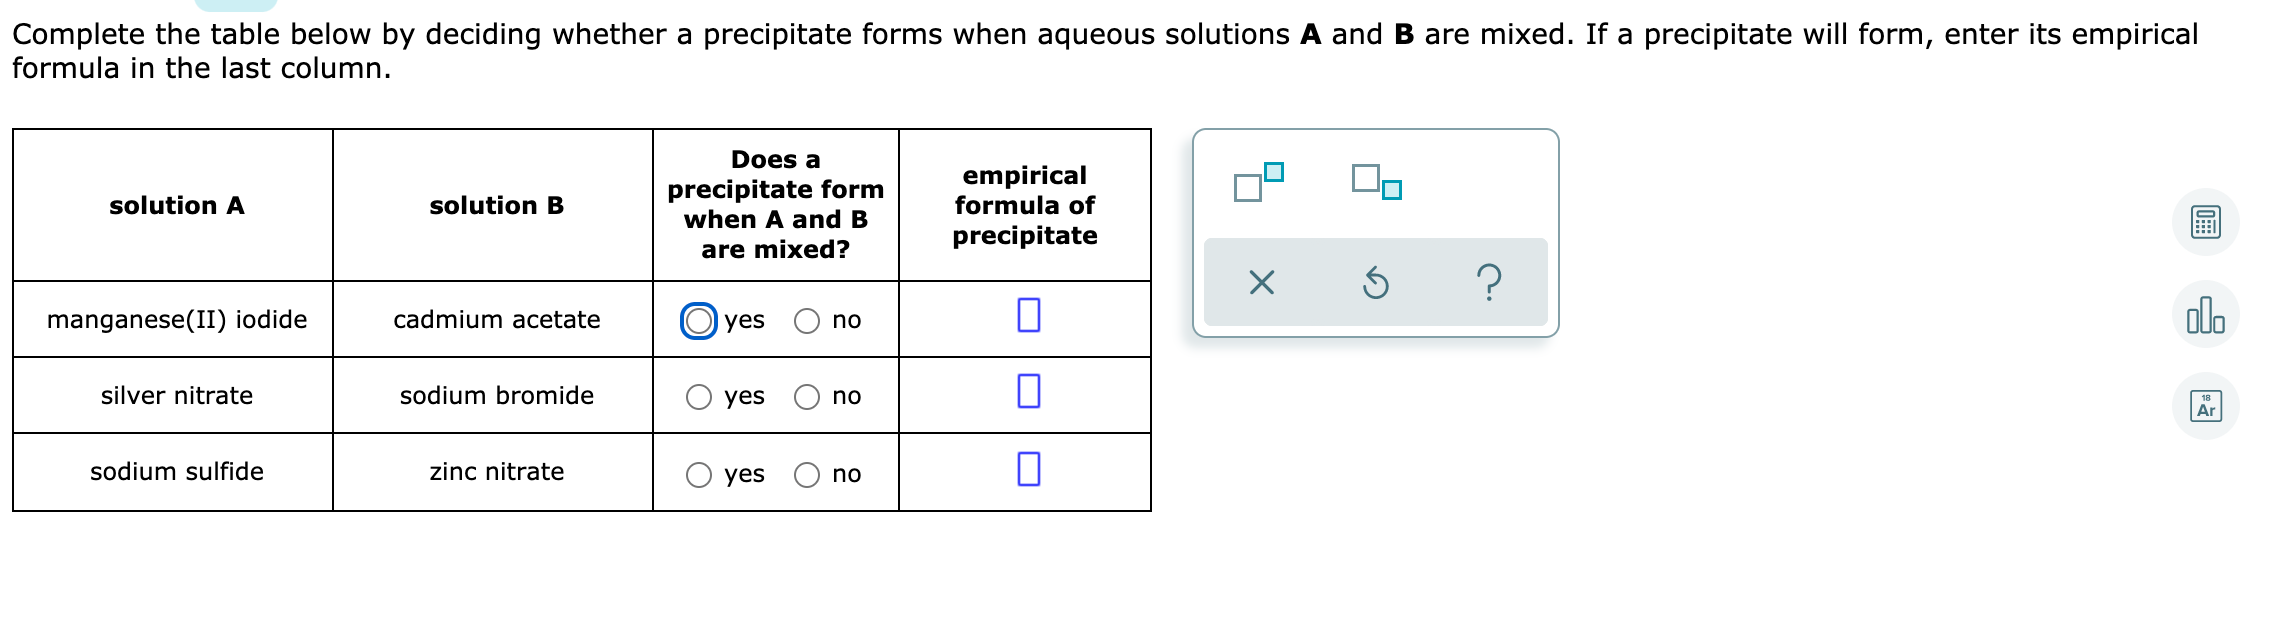 Complete the table below by deciding whether a precipitate forms when aqueous solutions A and B are mixed. If a precipitate will form, enter its empirical
formula in the last column.
Does a
precipitate form
when A and B
empirical
formula of
solution A
solution B
precipitate
are mixed?
olo
manganese(II) iodide
cadmium acetate
O yes
no
silver nitrate
sodium bromide
yes
no
18
Ar
sodium sulfide
zinc nitrate
O yes
no
